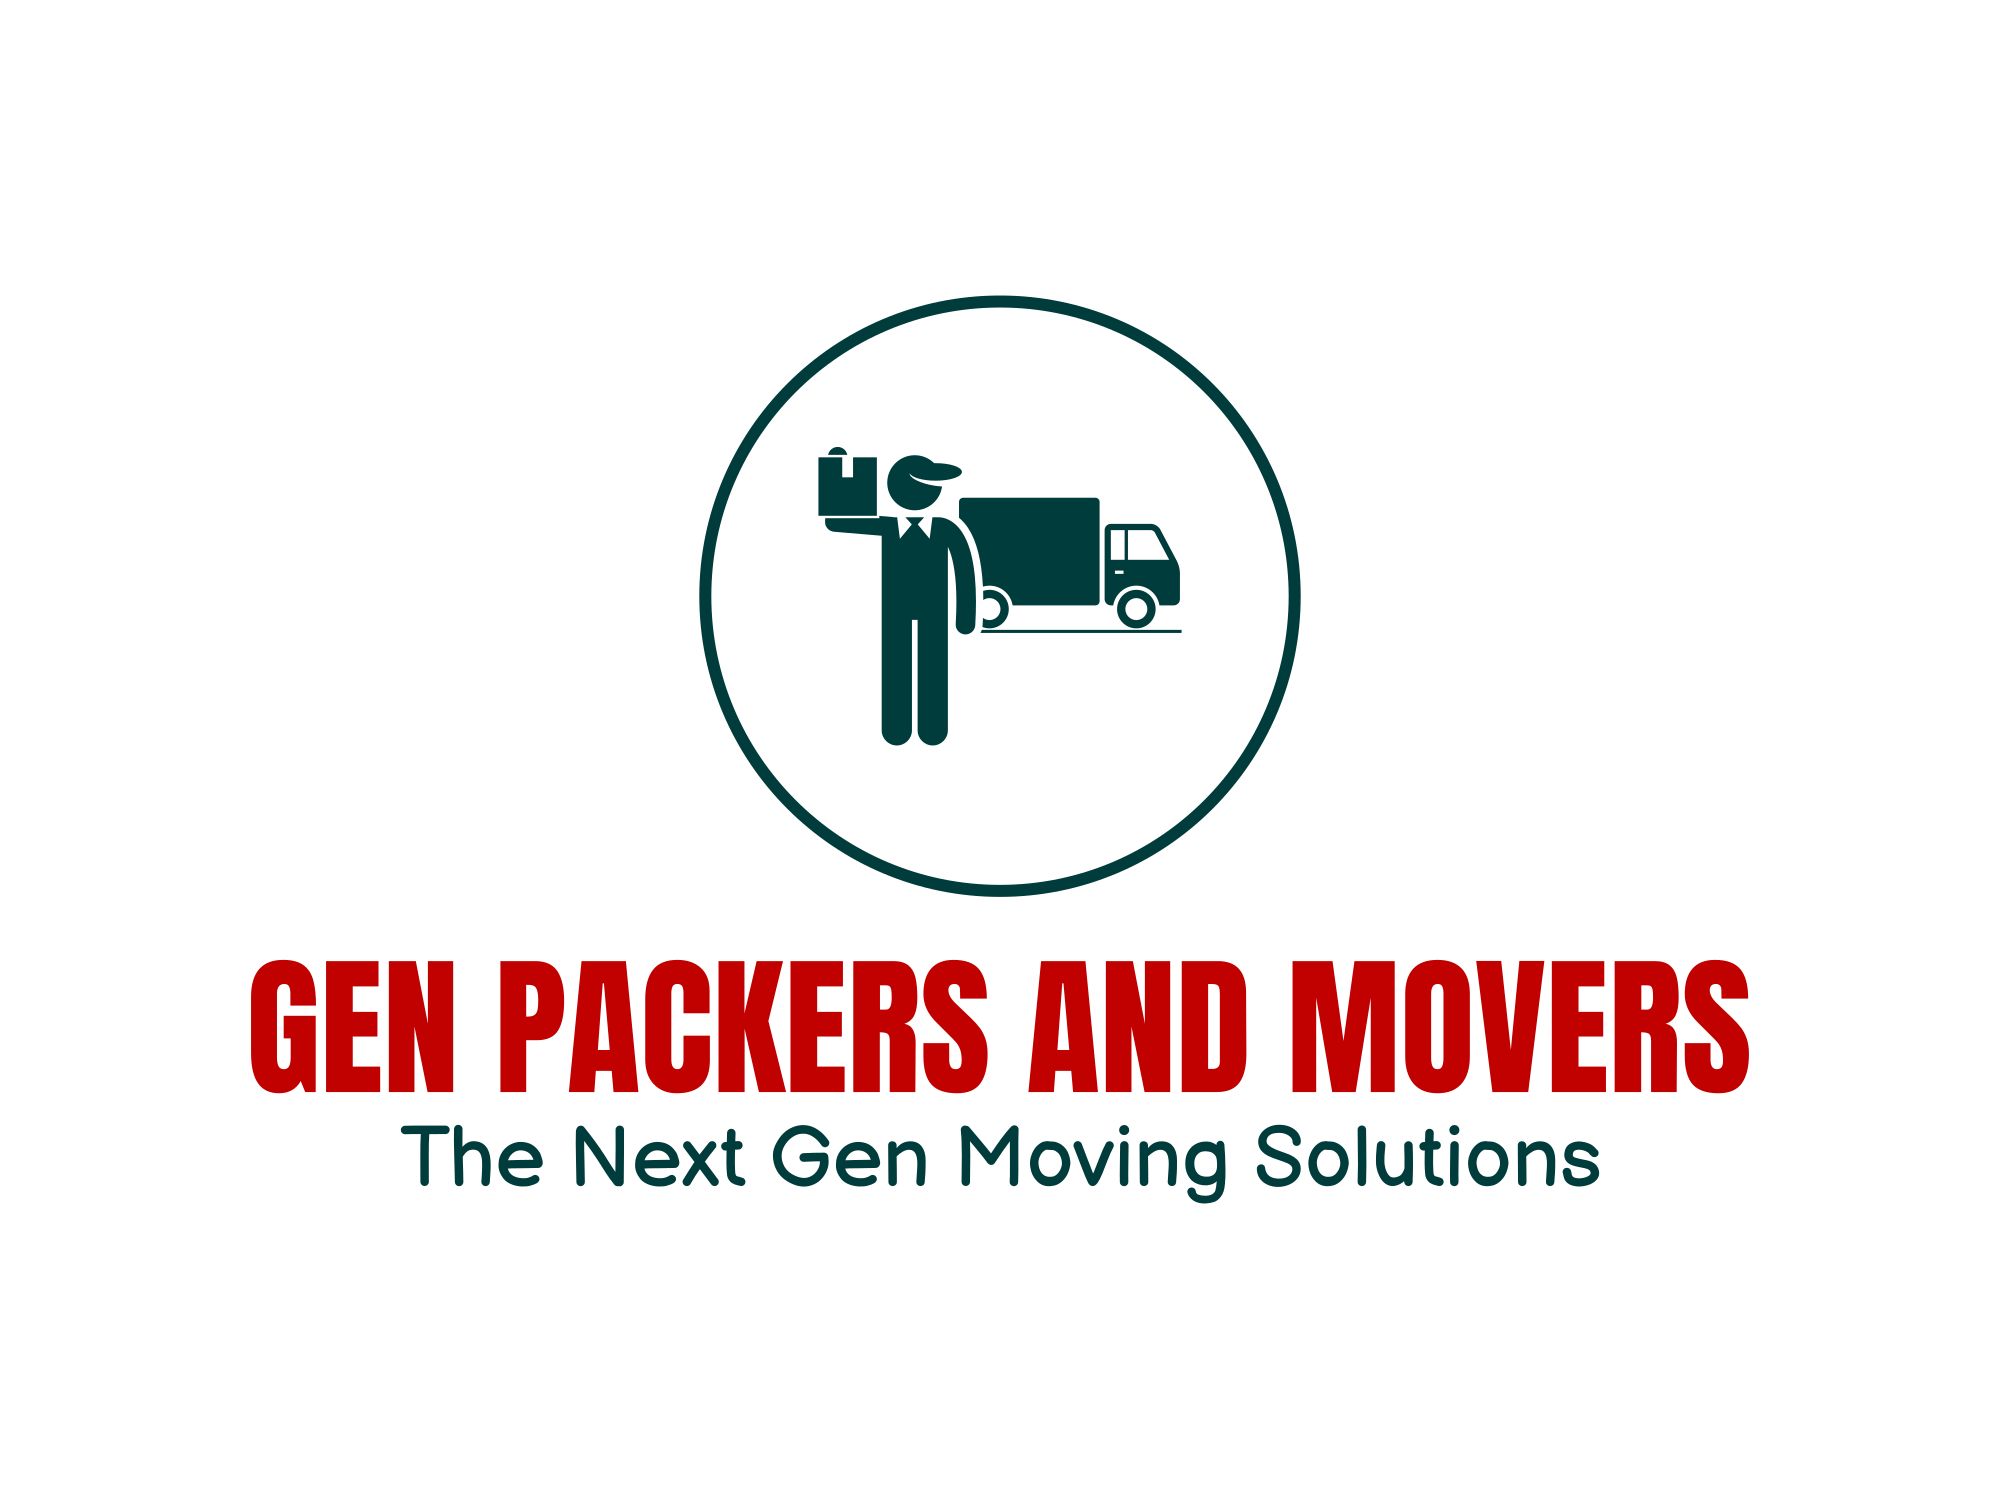 Gen Packers and Movers